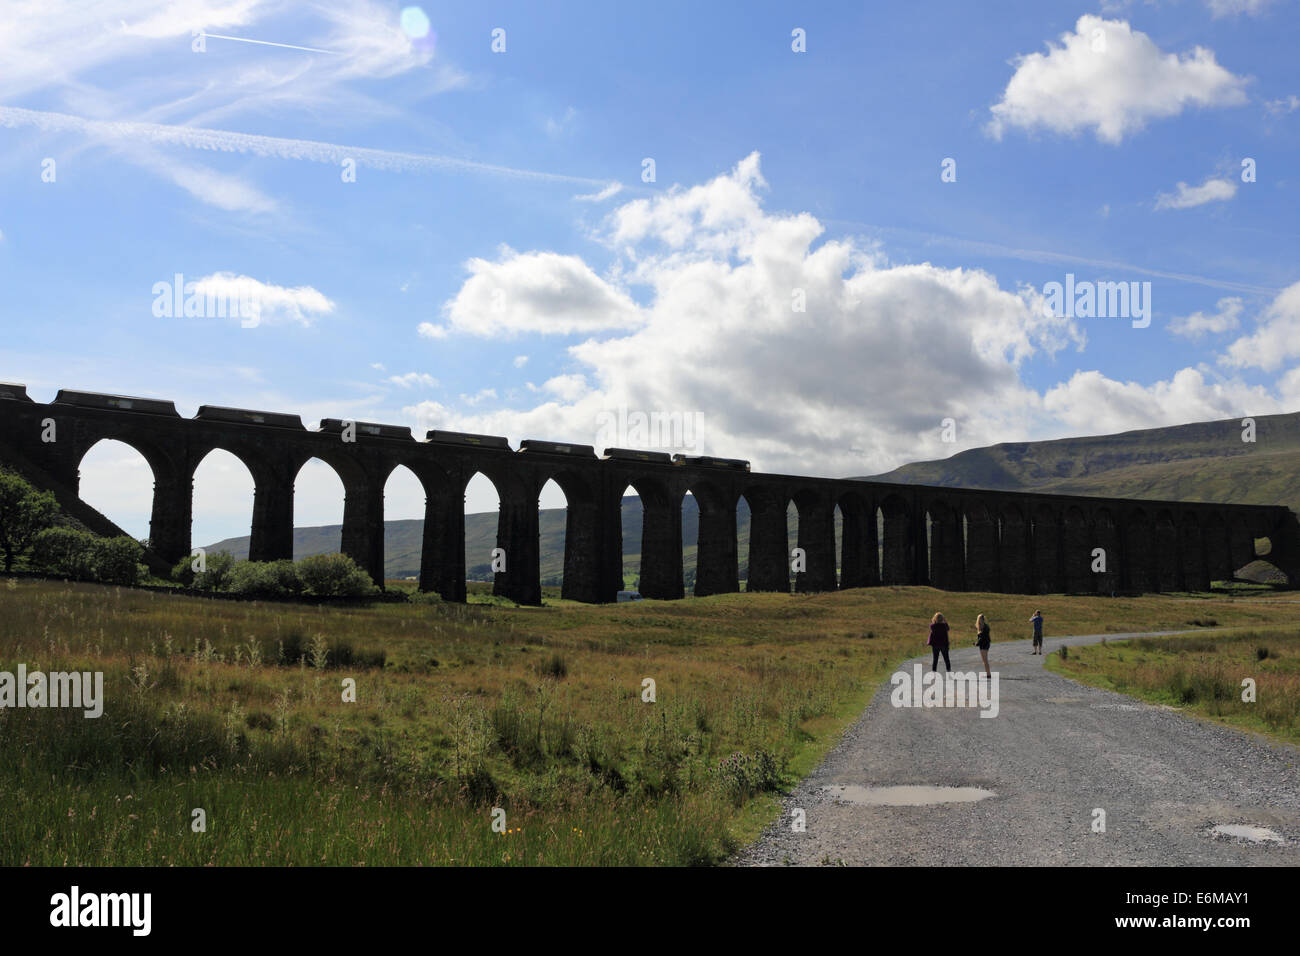 The Ribblehead Viaduct carries the Settle-Carlisle Railway across the River Ribble at Ribblehead, North Yorkshire, England. Stock Photo